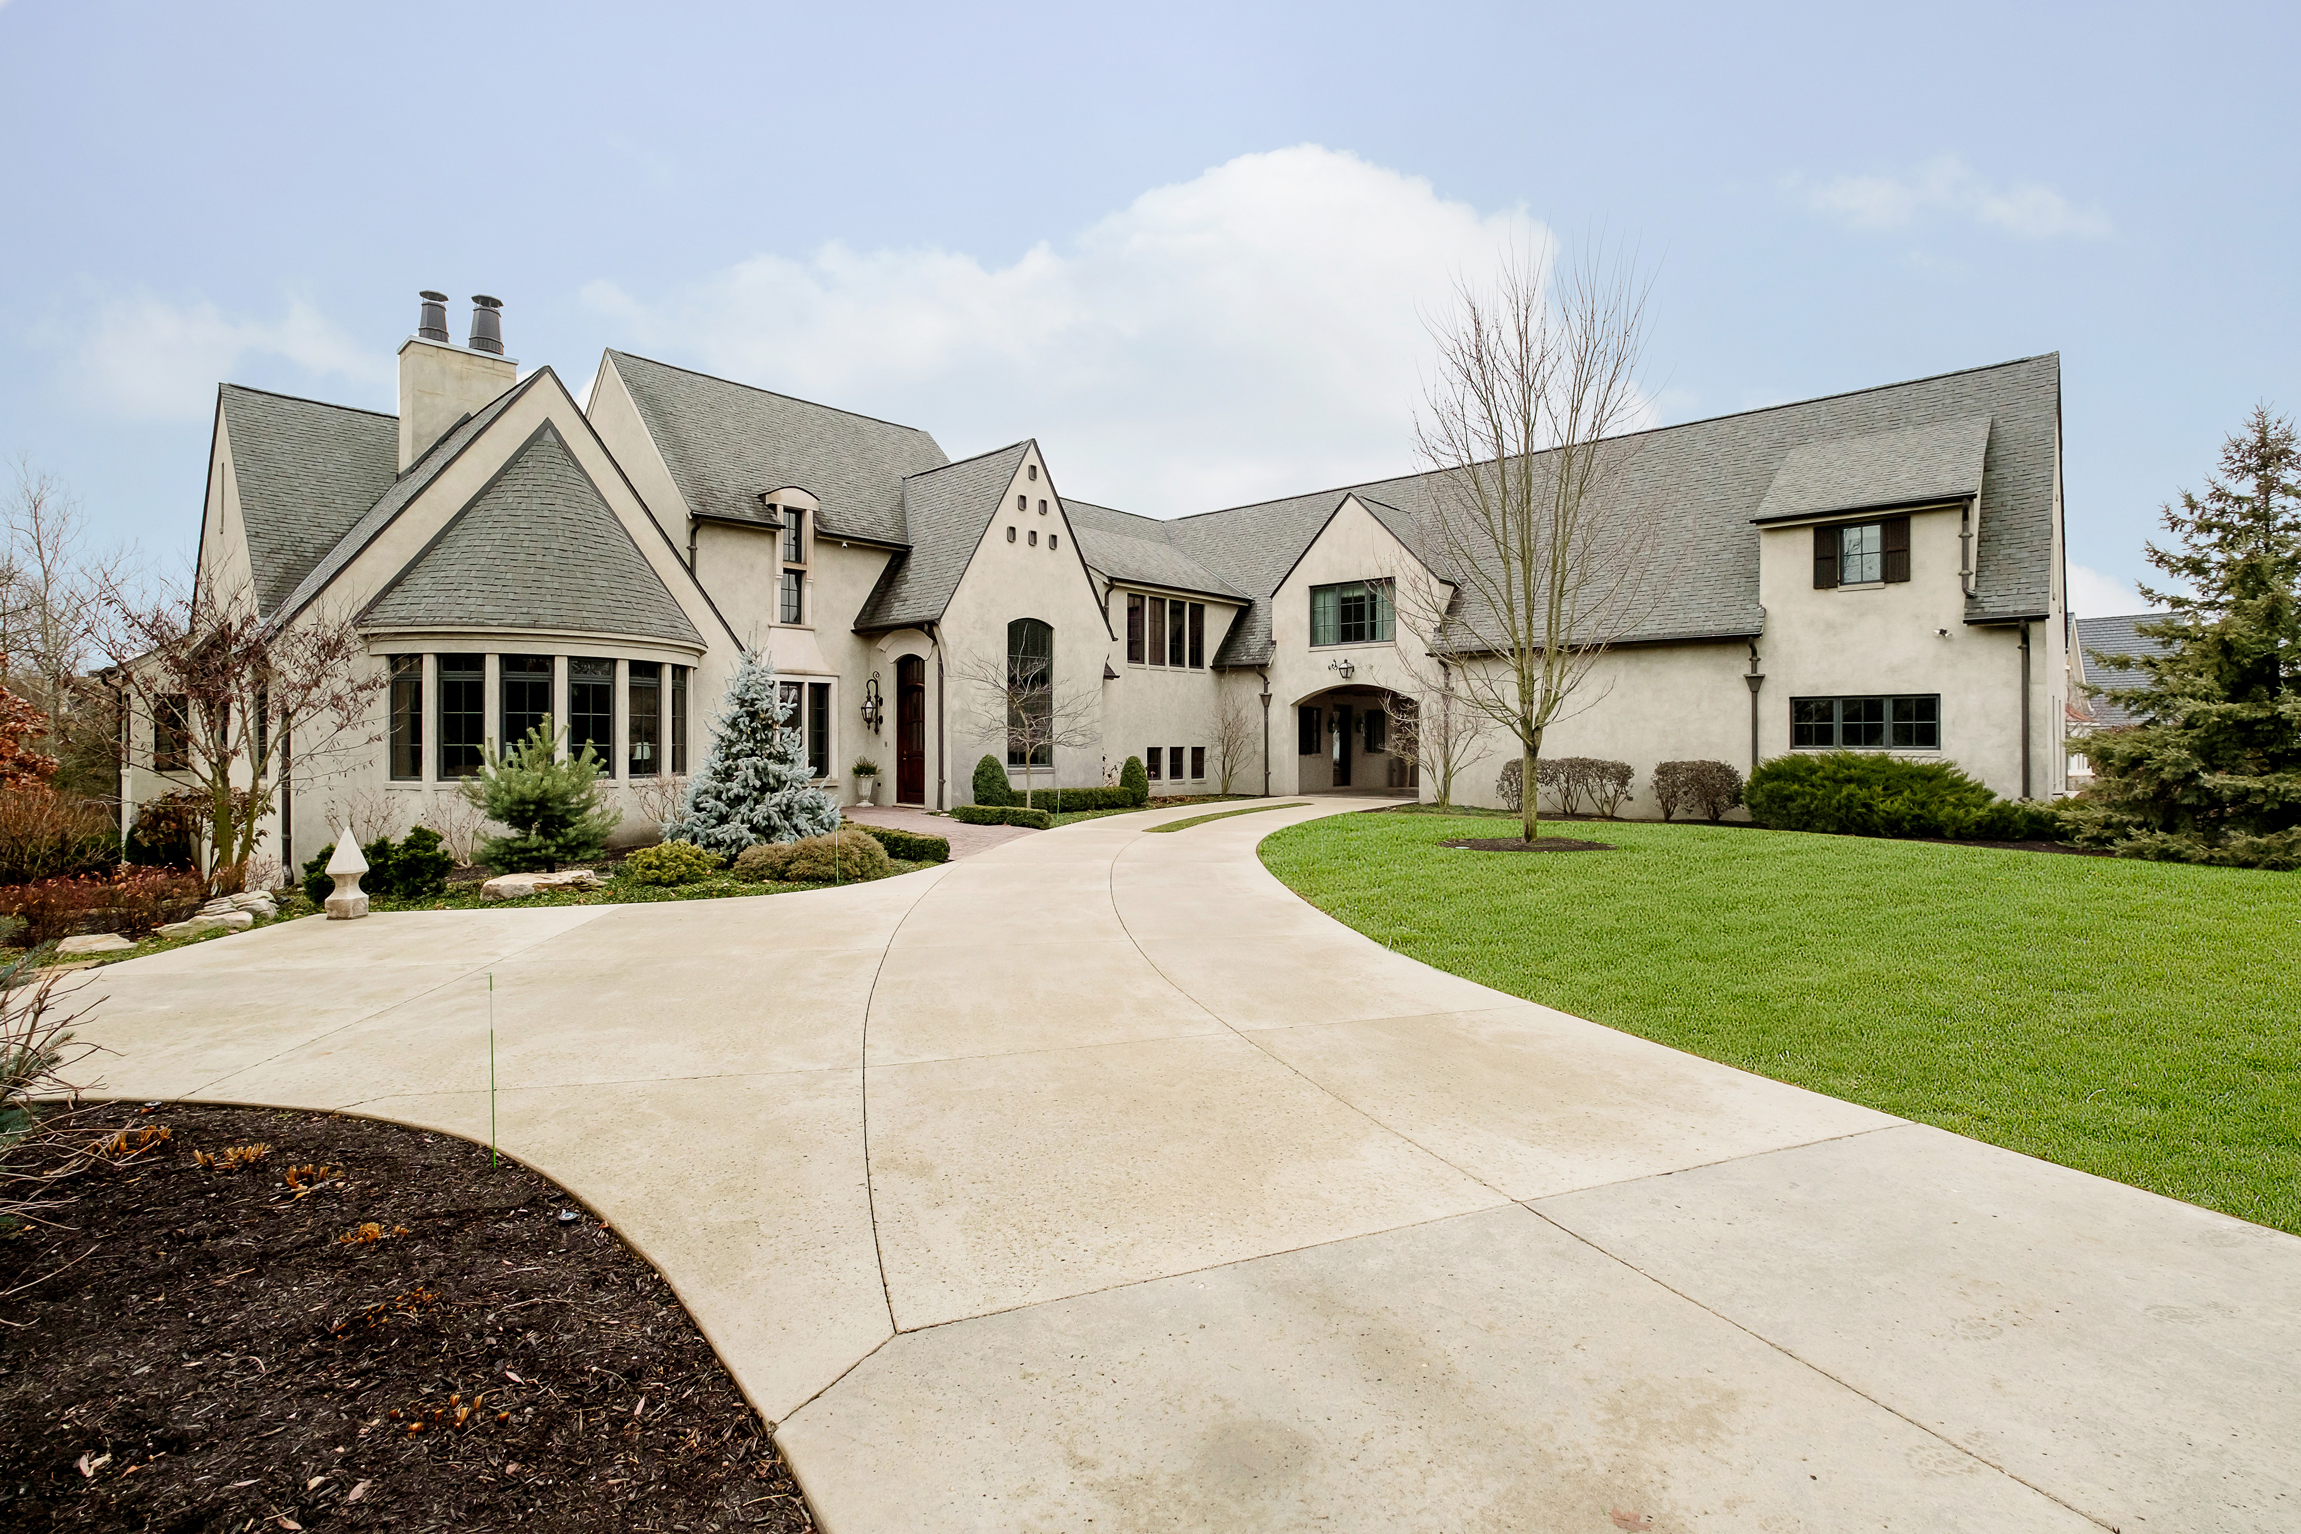 Luxury Meets History at this Timeless Home in Zionsville!